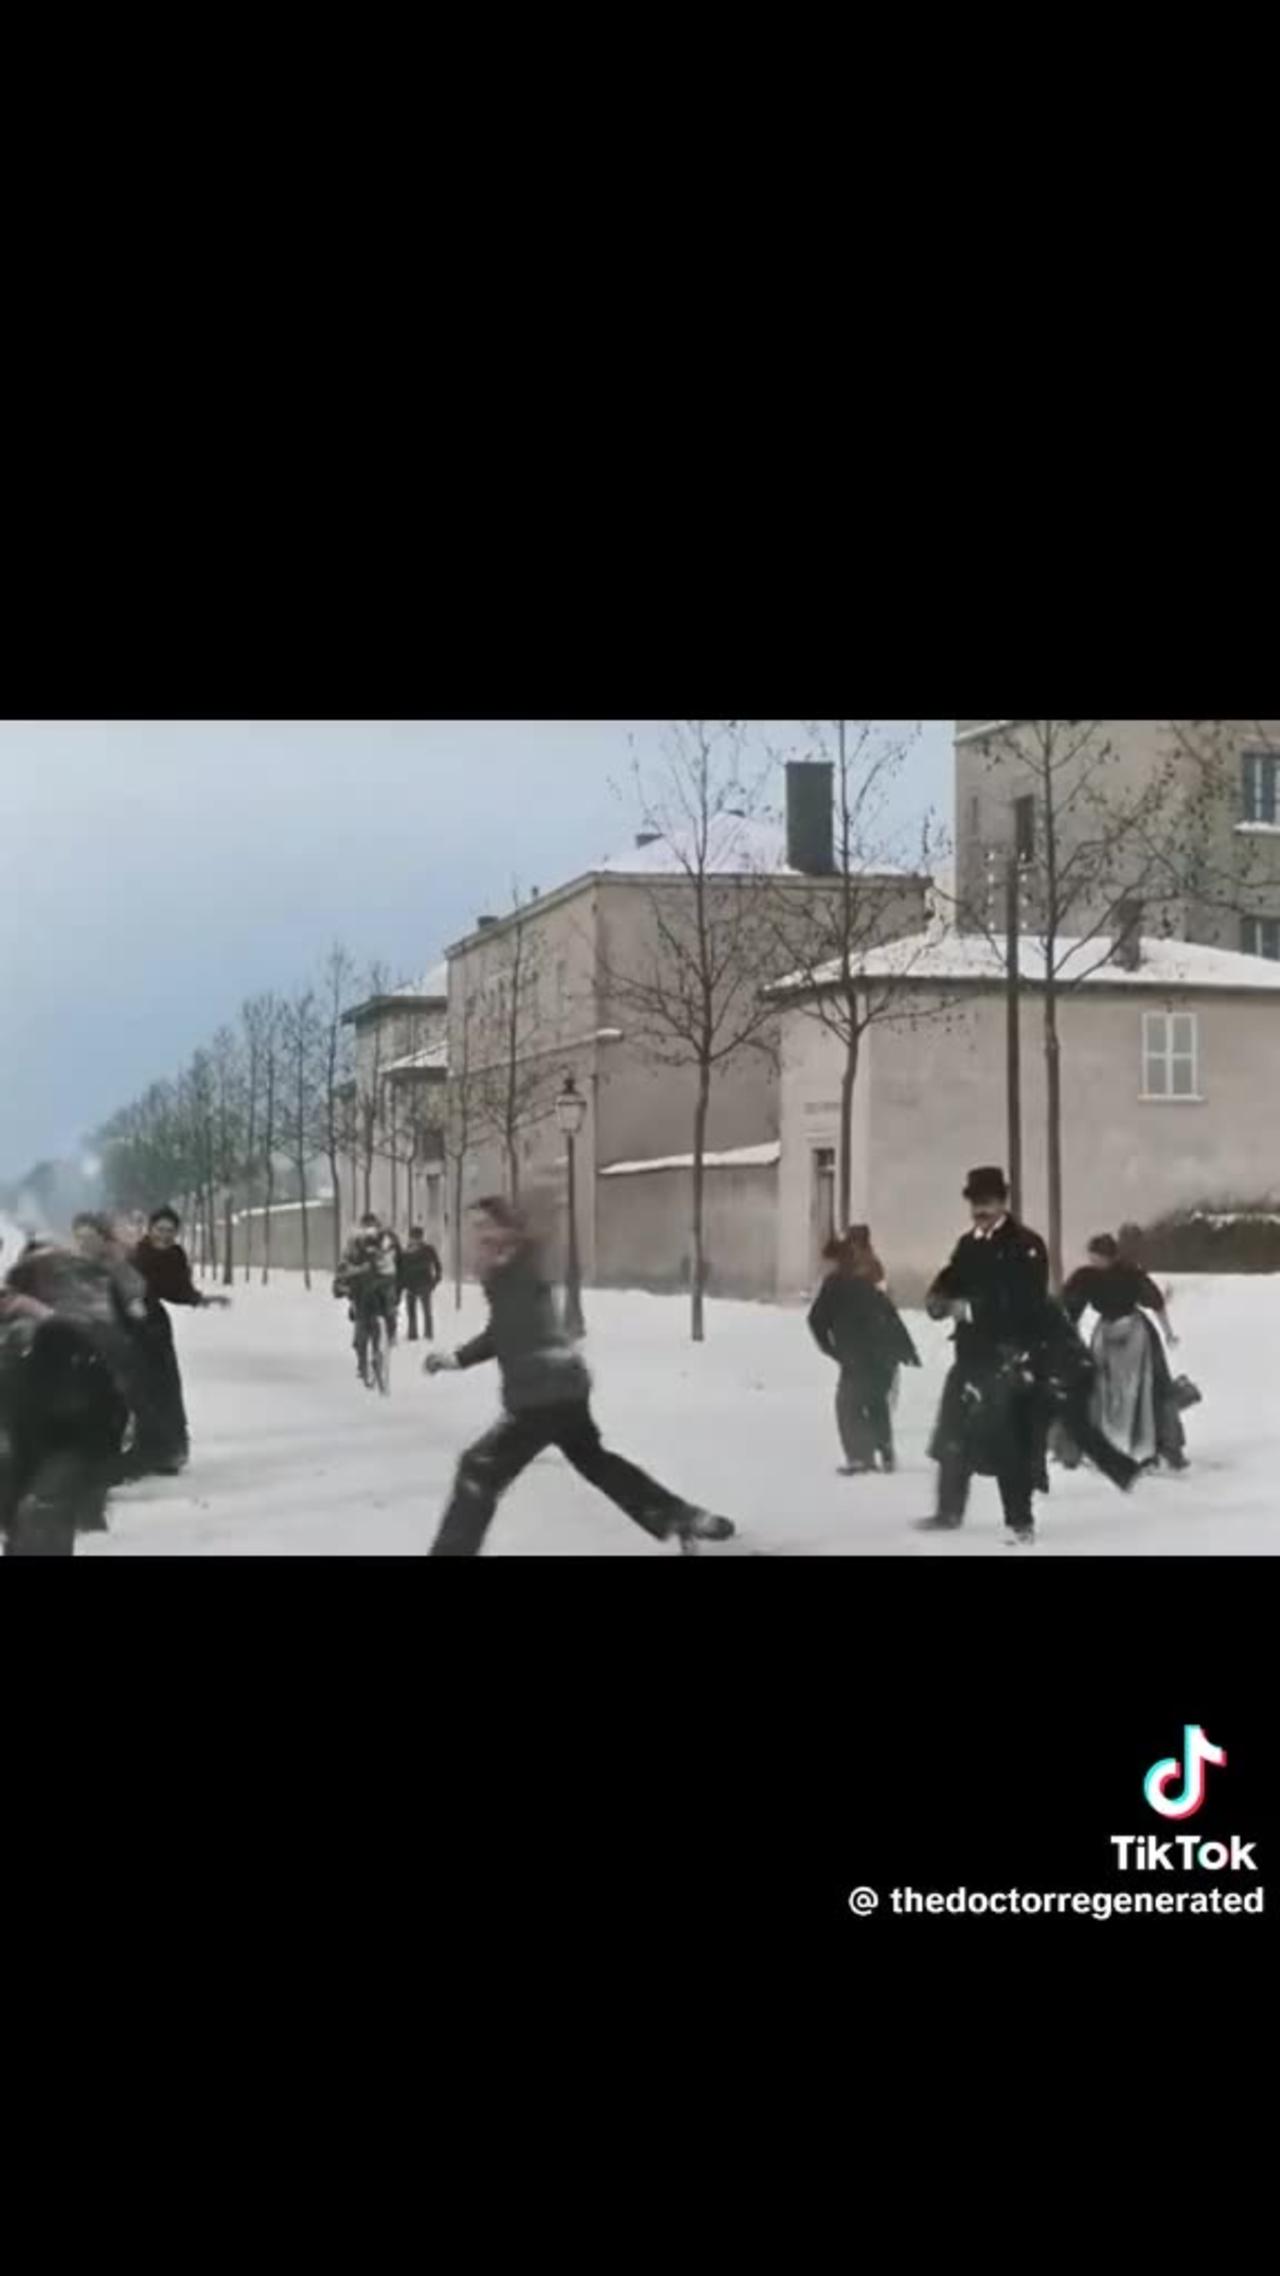 From 1890’s France From A Street Wide Snowball Fight To Some Literal Horsing Around~We Are All The Same In Many Ways Over 100 